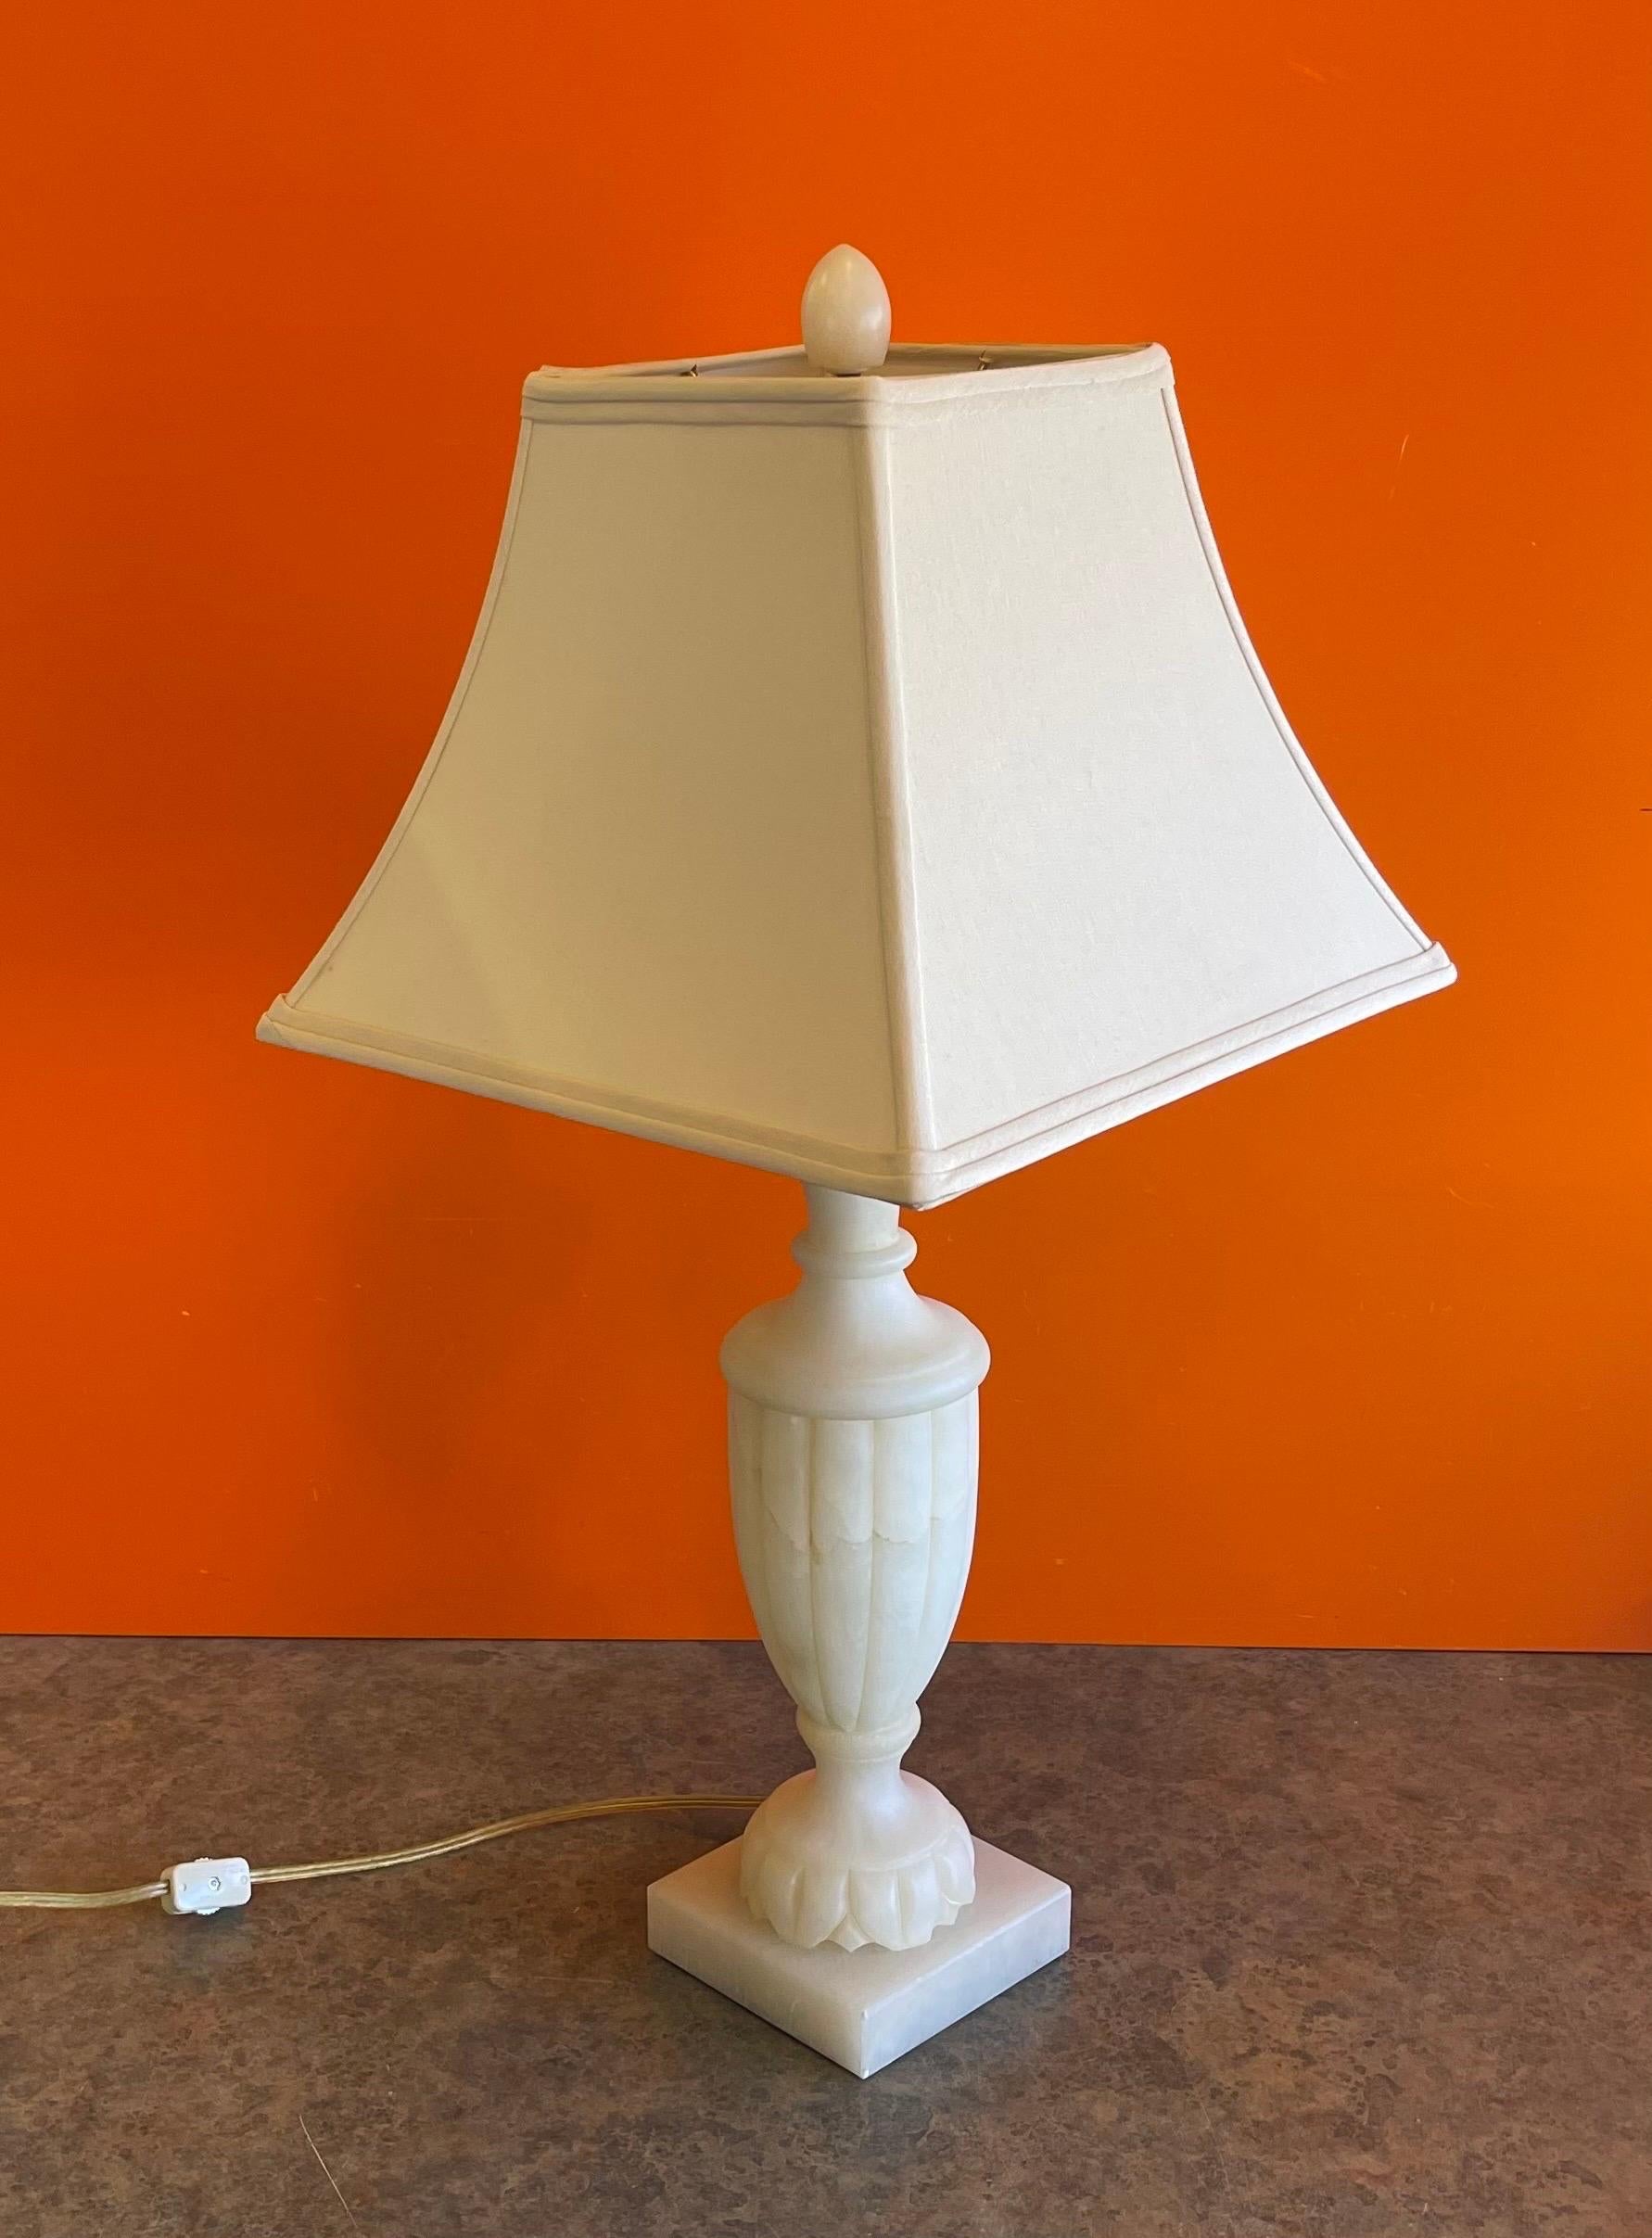 A really nice hand carved alabaster table lamp by Sarreid, Ltd of Spain, circa 1990s. The lamp is in very good condition with no chips or cracks and measures 26